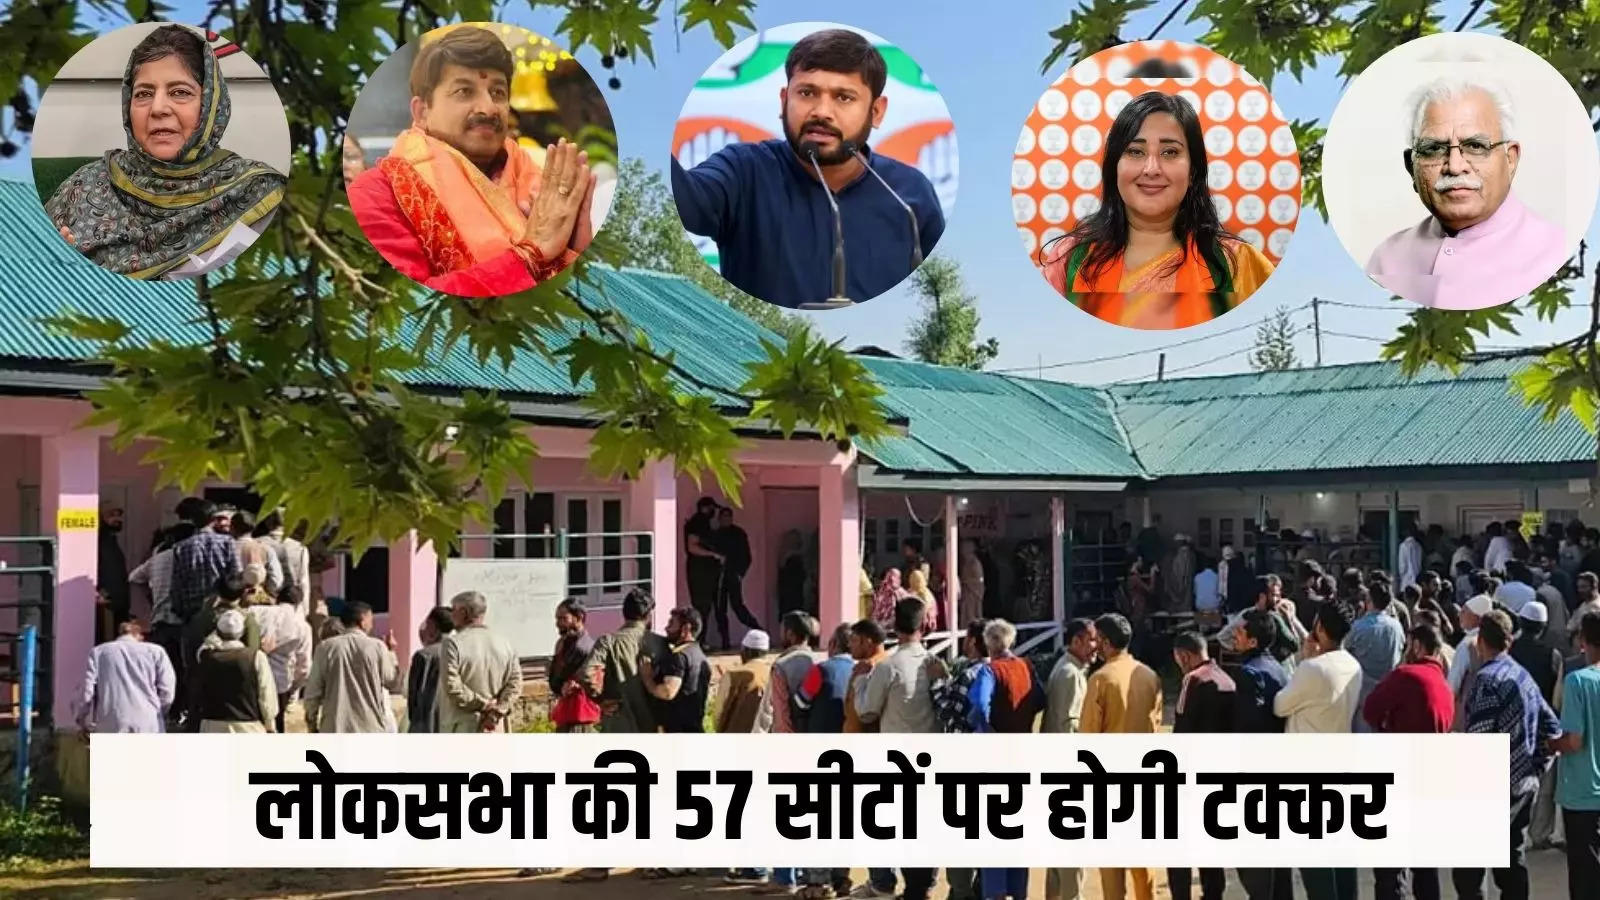 Voting will be held on 57 seats of 7 states in the sixth phase of Lok Sabha elections, everyone's eyes are on this VIP seat of Jammu and Kashmir